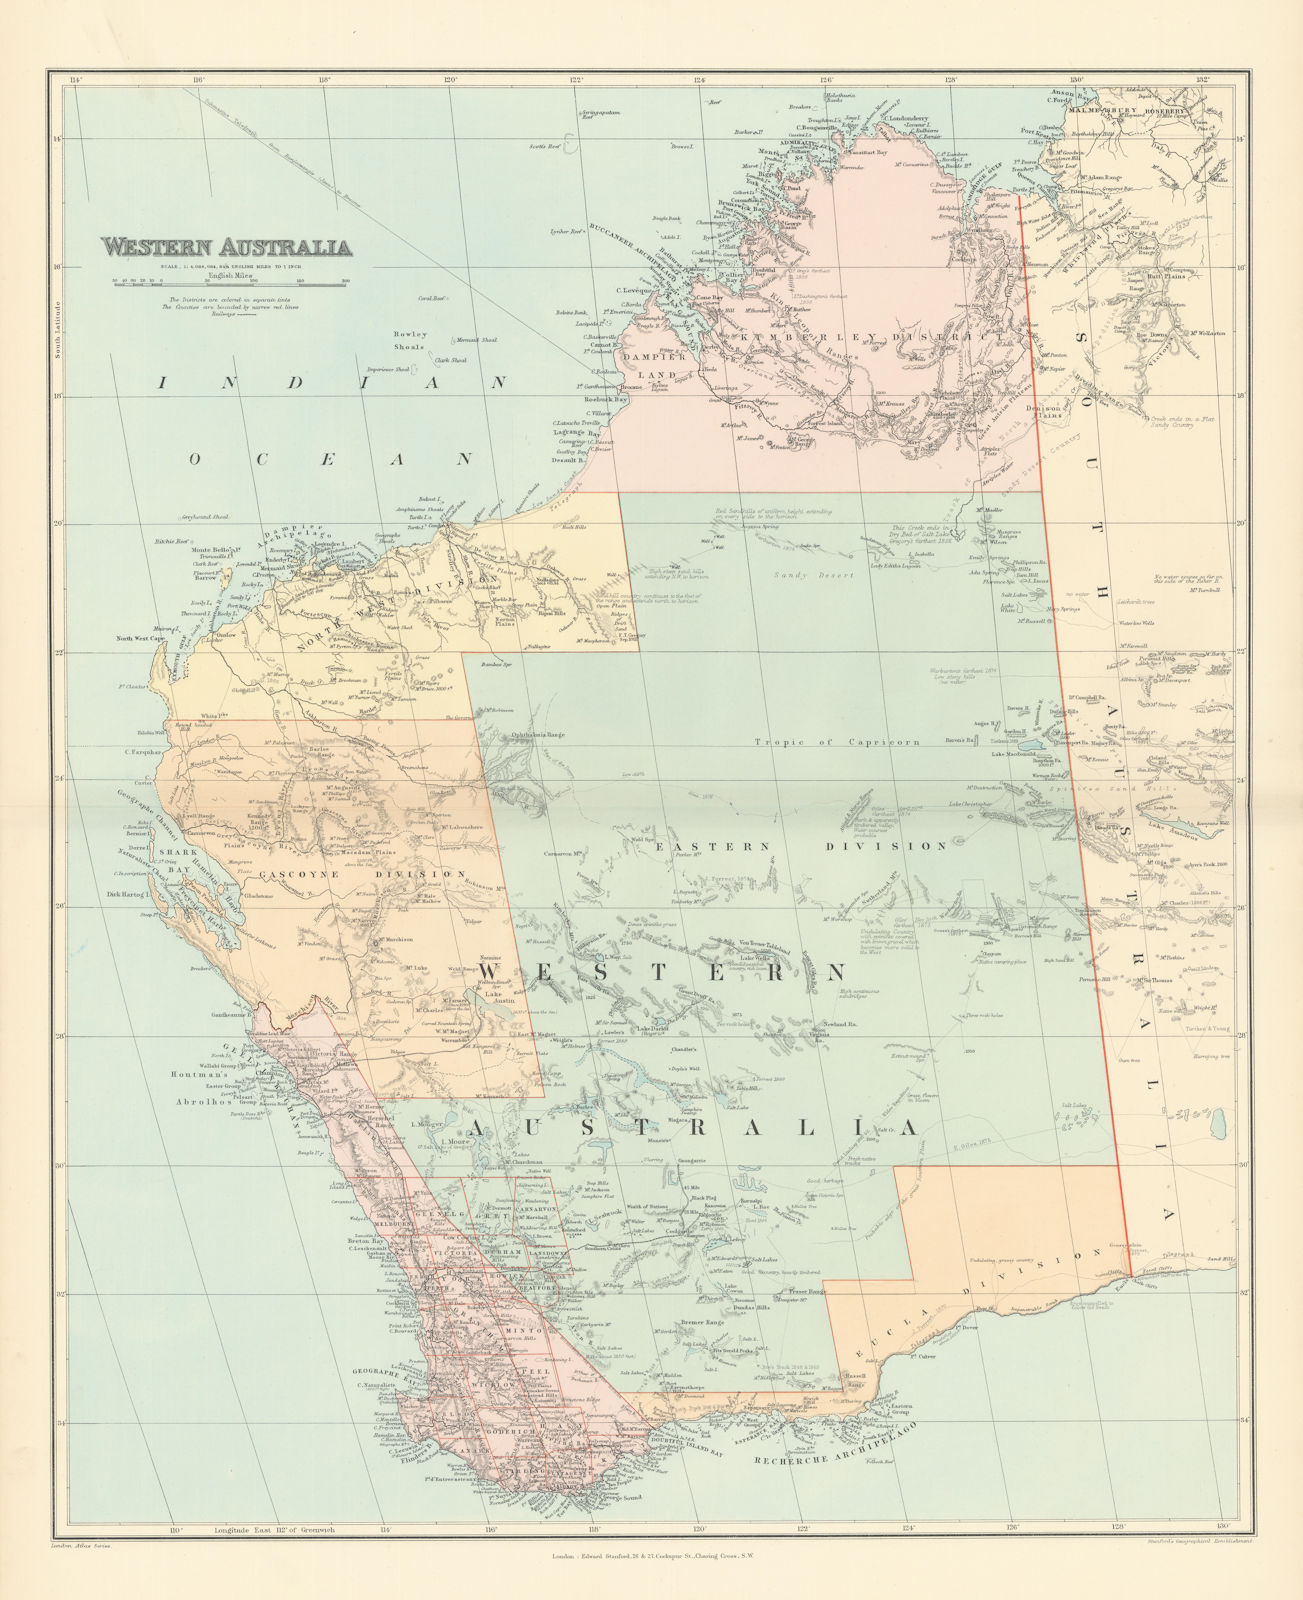 Associate Product Western Australia. Districts. Explorers' routes. Large 66x55cm STANFORD 1896 map